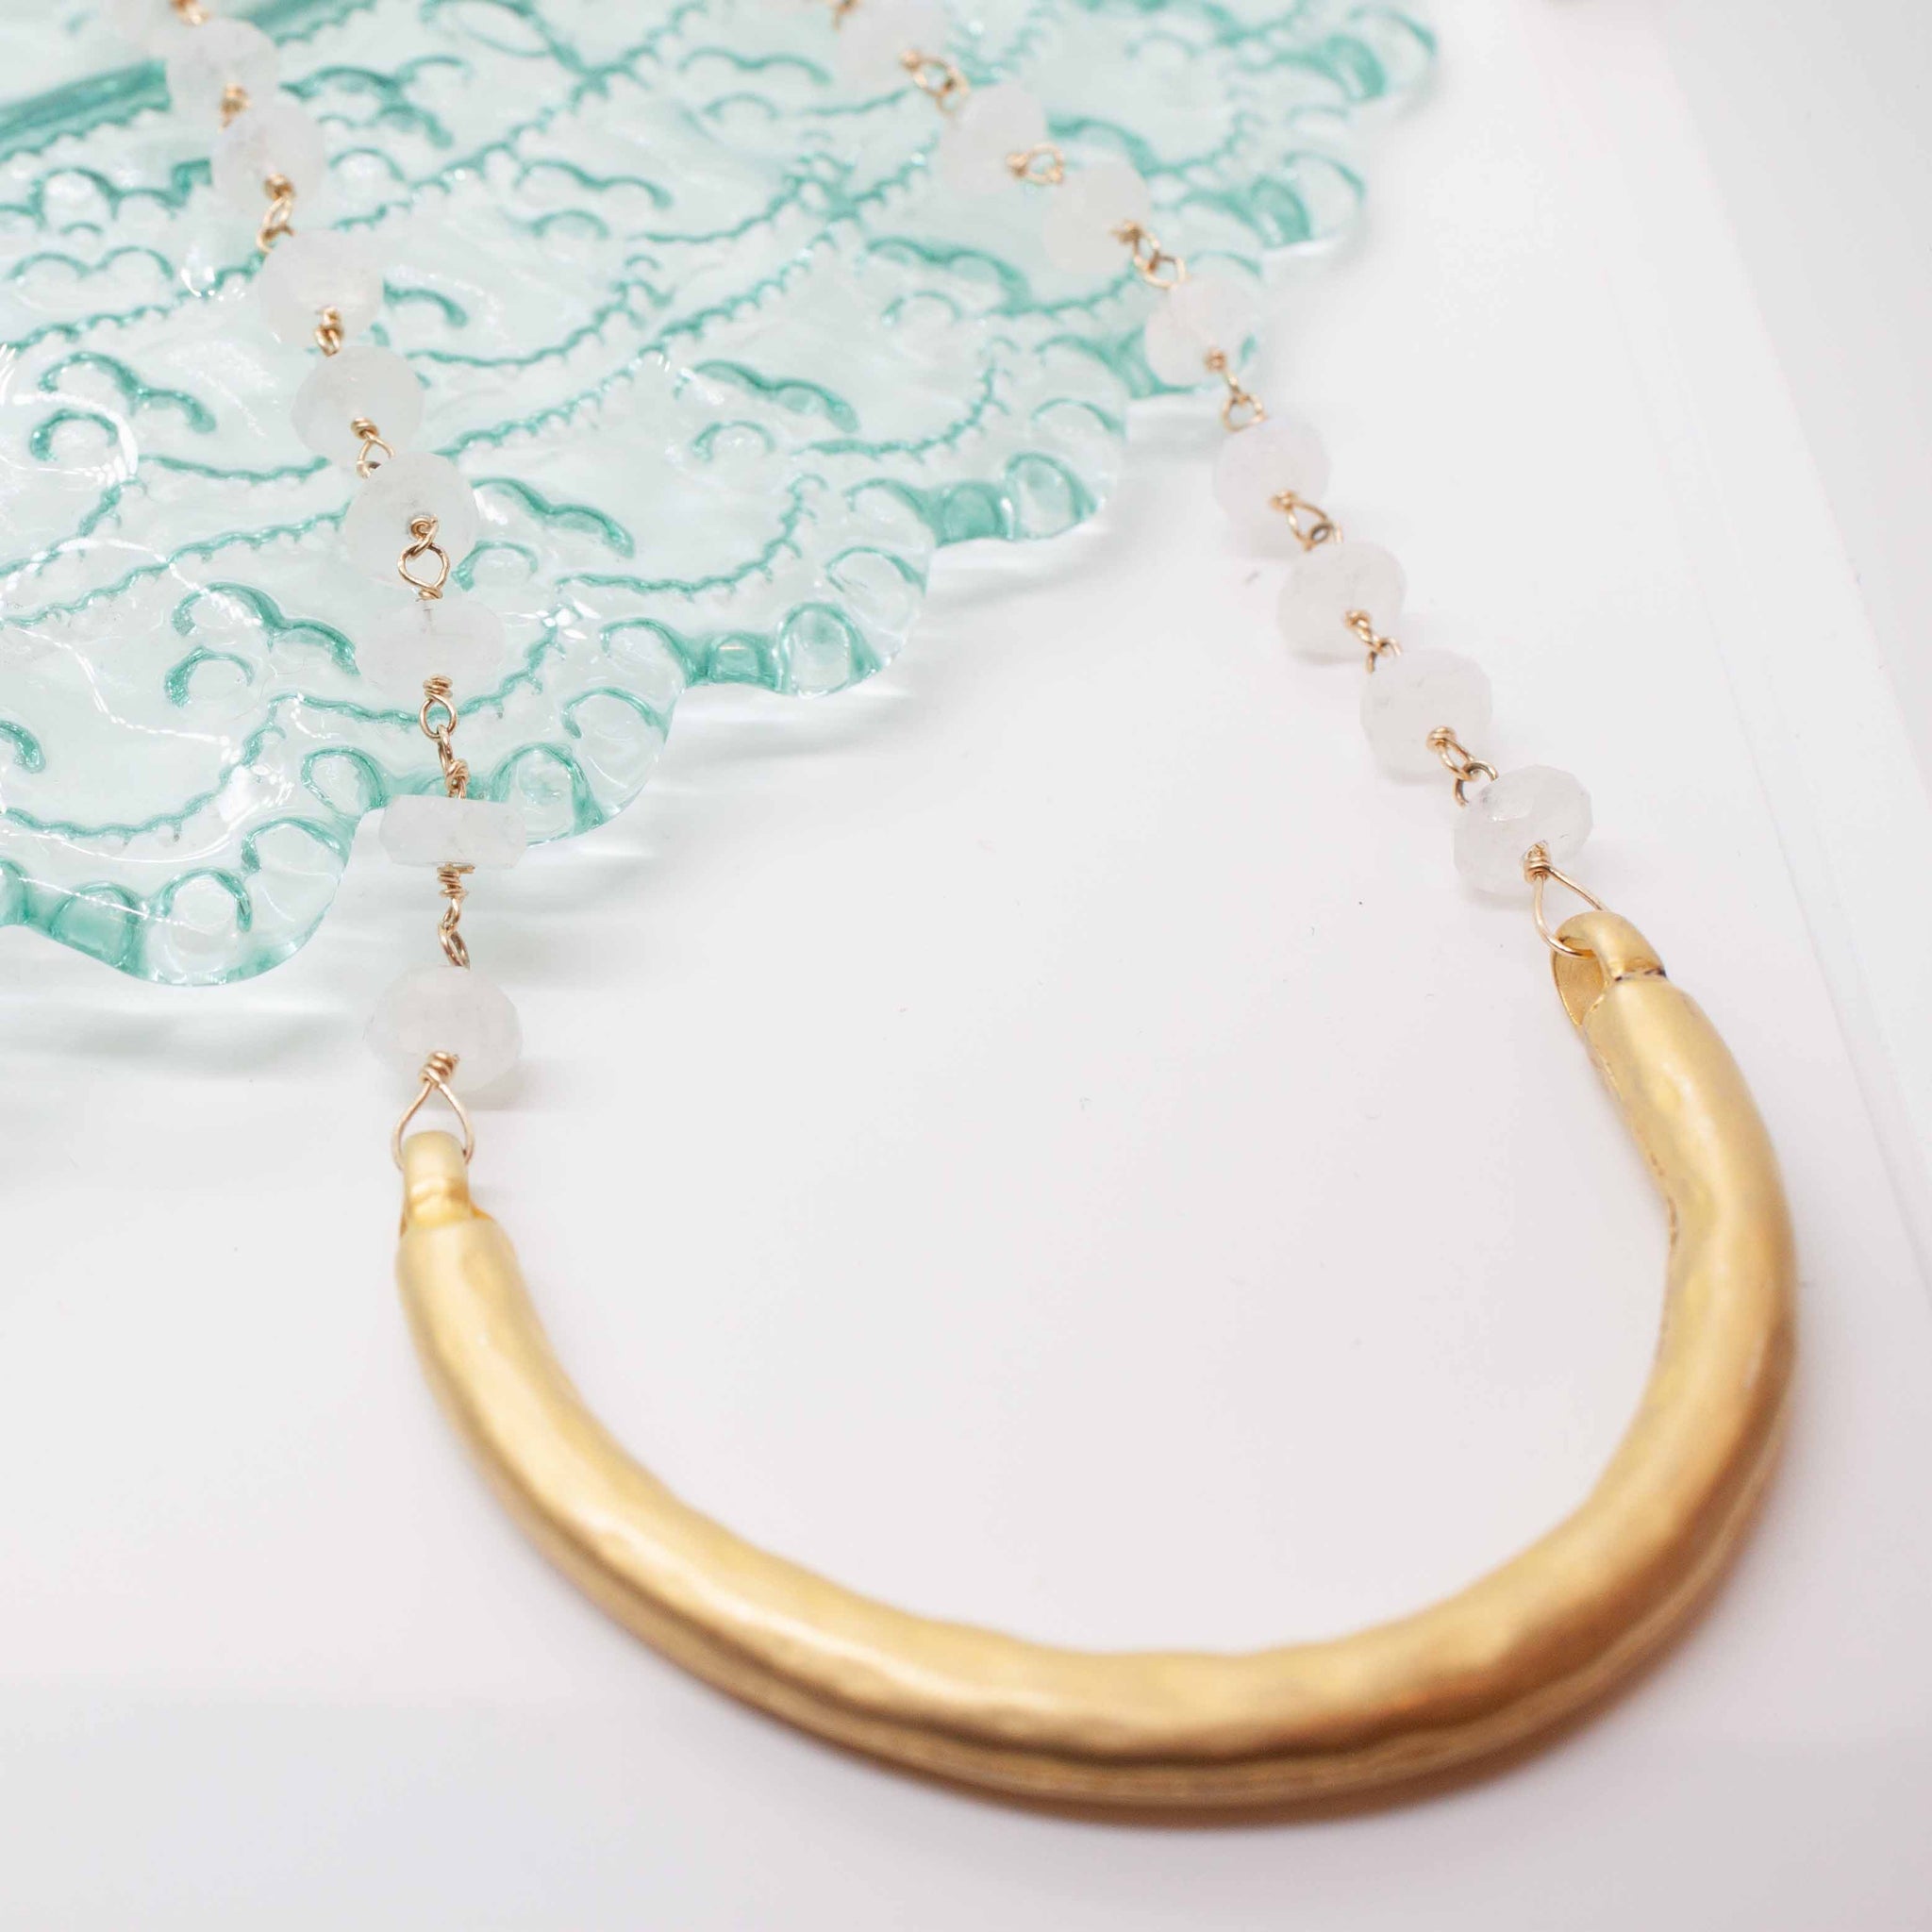 This delicate moonstone necklace ends perfectly with a well placed golden 'smile.' A versatile piece for wearing with your summer whites or winter greys. 30 inch necklace with gold wire wrapped faceted moonstone beads and gold vermeil pendant. Handmade in Toronto by kp jewelry co.